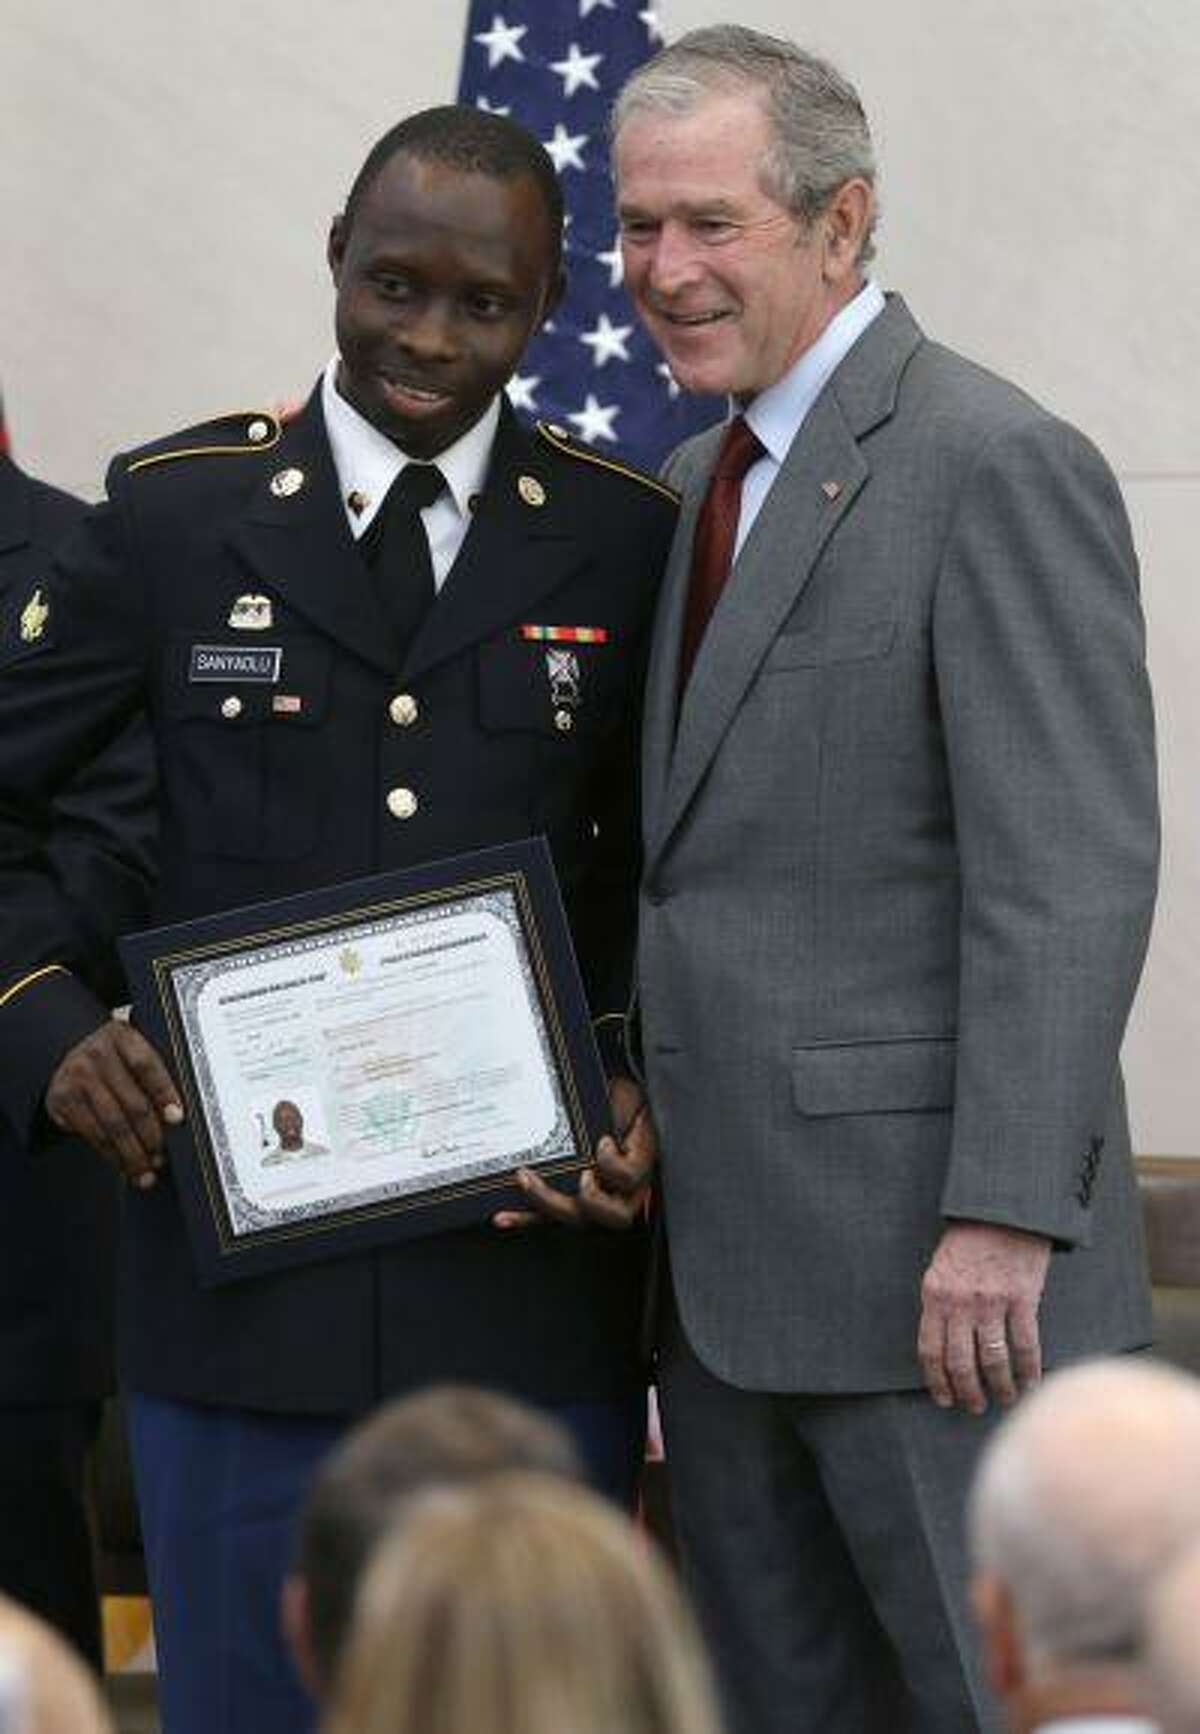 Former President George W. Bush, right, posses for a photo with Taofeek Adeyemi Sanyaolu, of Nigeria, with his U.S. citizen certificate after a ceremony at the The George W. Bush Presidential Center in Dallas, Wednesday, July 10, 2013. Twenty new citizens took the oath of U.S. citizenship at the former president's library. (AP Photo/LM Otero)